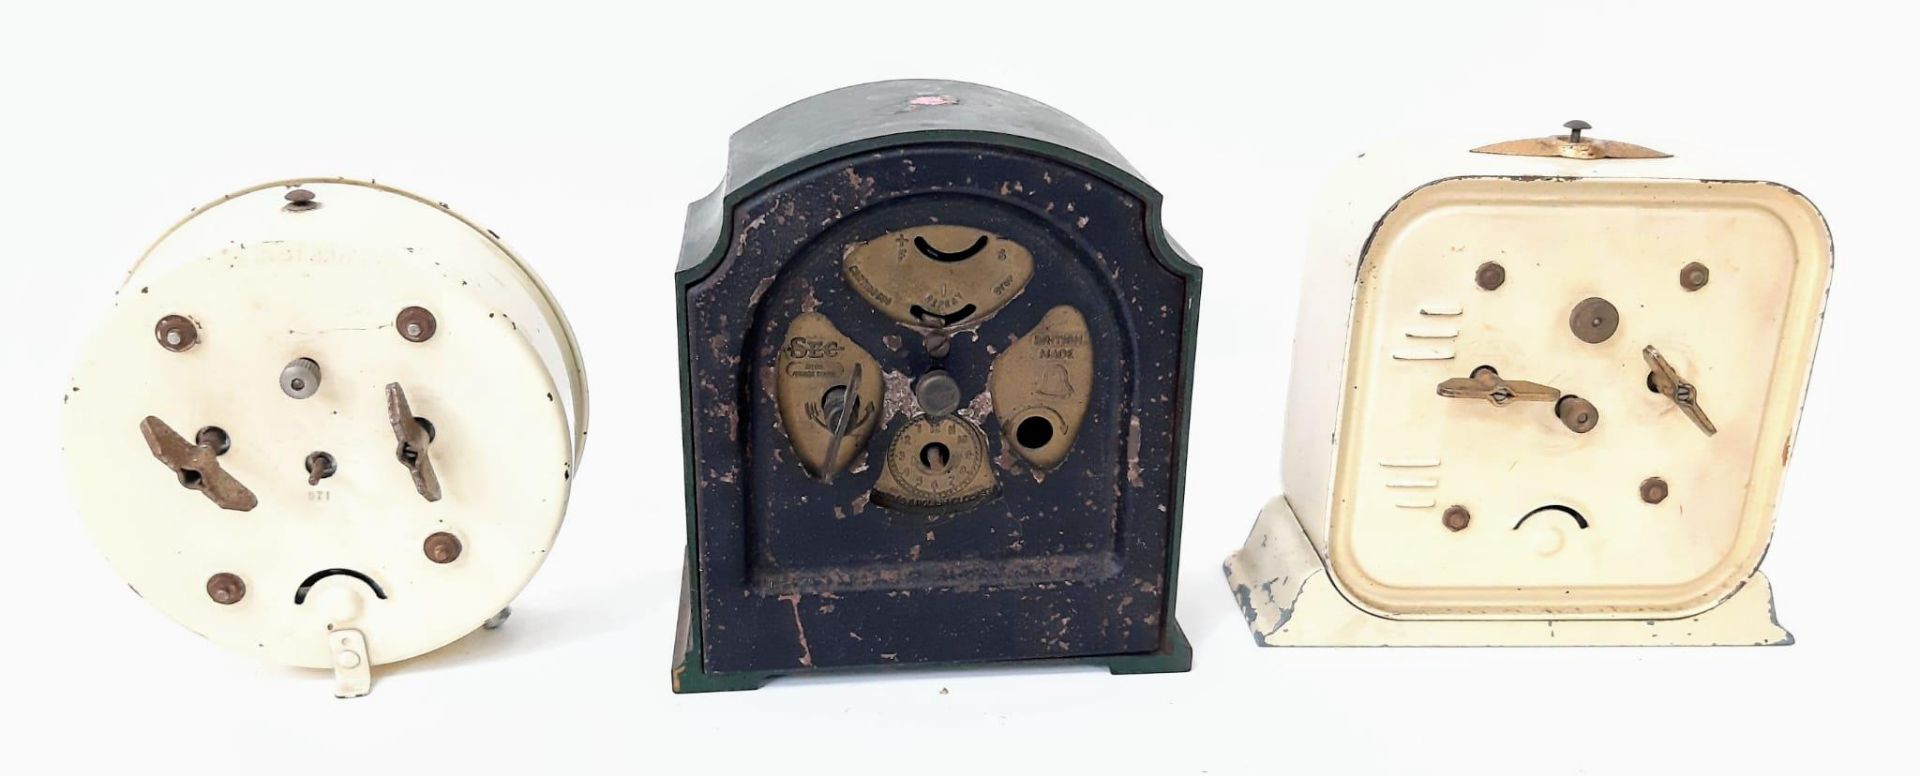 Watch time wizz by with these six vintage clocks. Five Smith's and one Bentima all fixed to unwind - Image 3 of 5